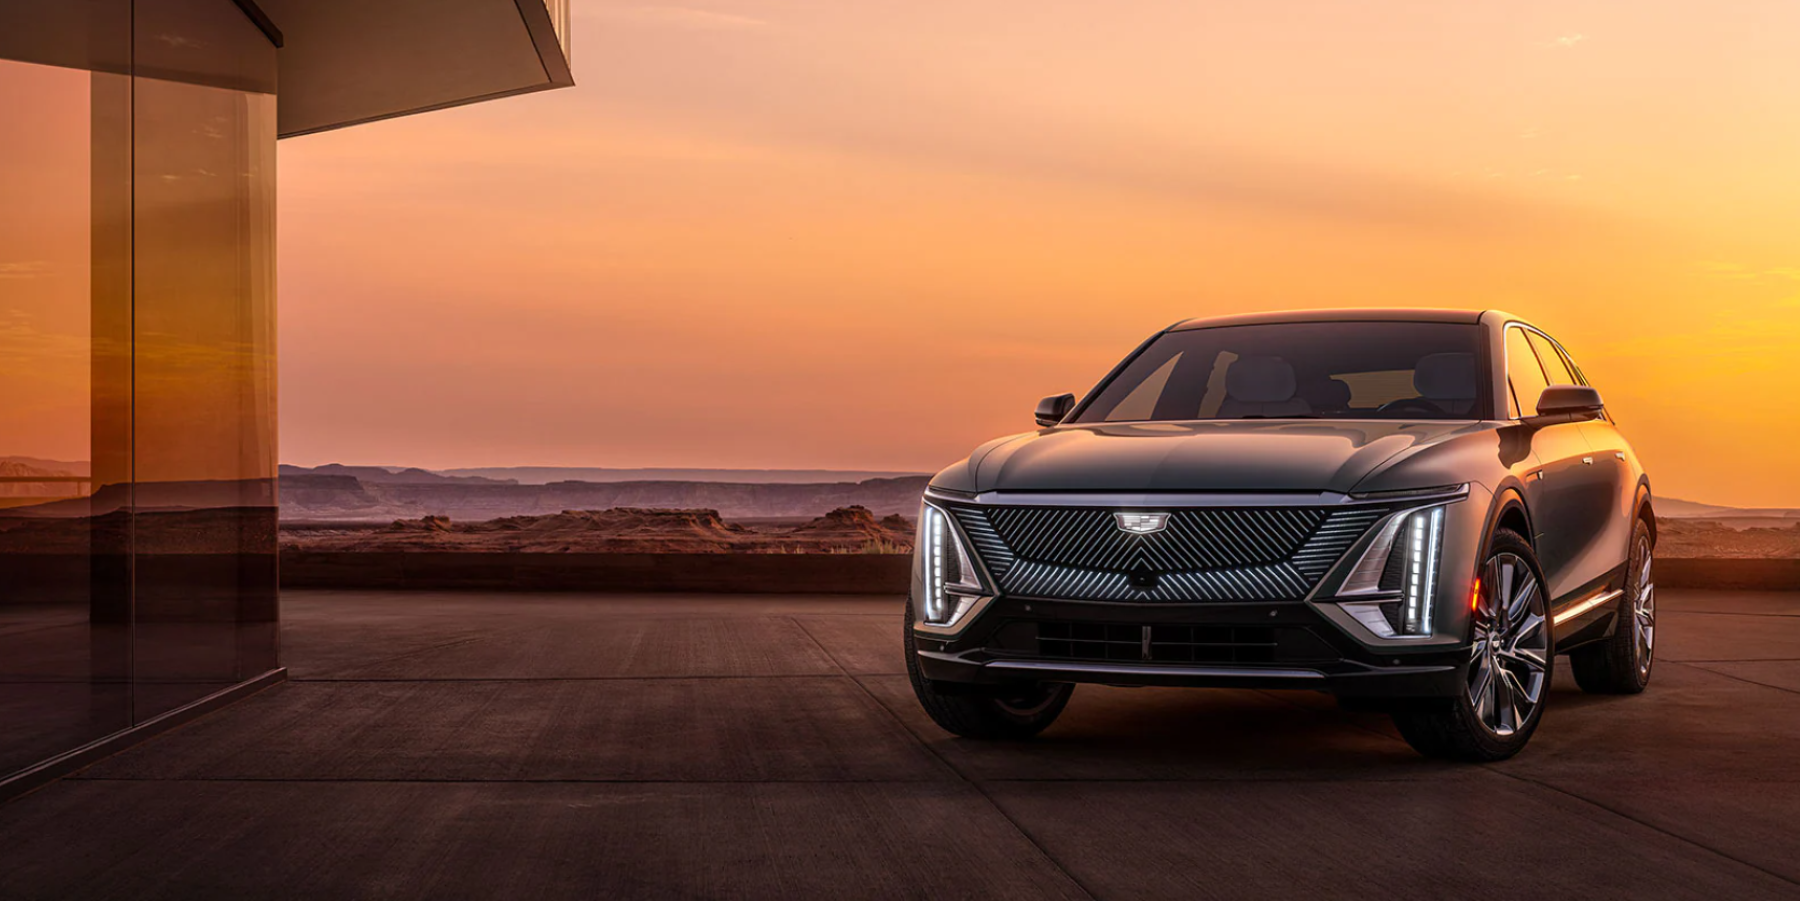 A gray 2023 Cadillac Lyriq luxury electric SUV model parked outside of a luxury house during a sunset sky